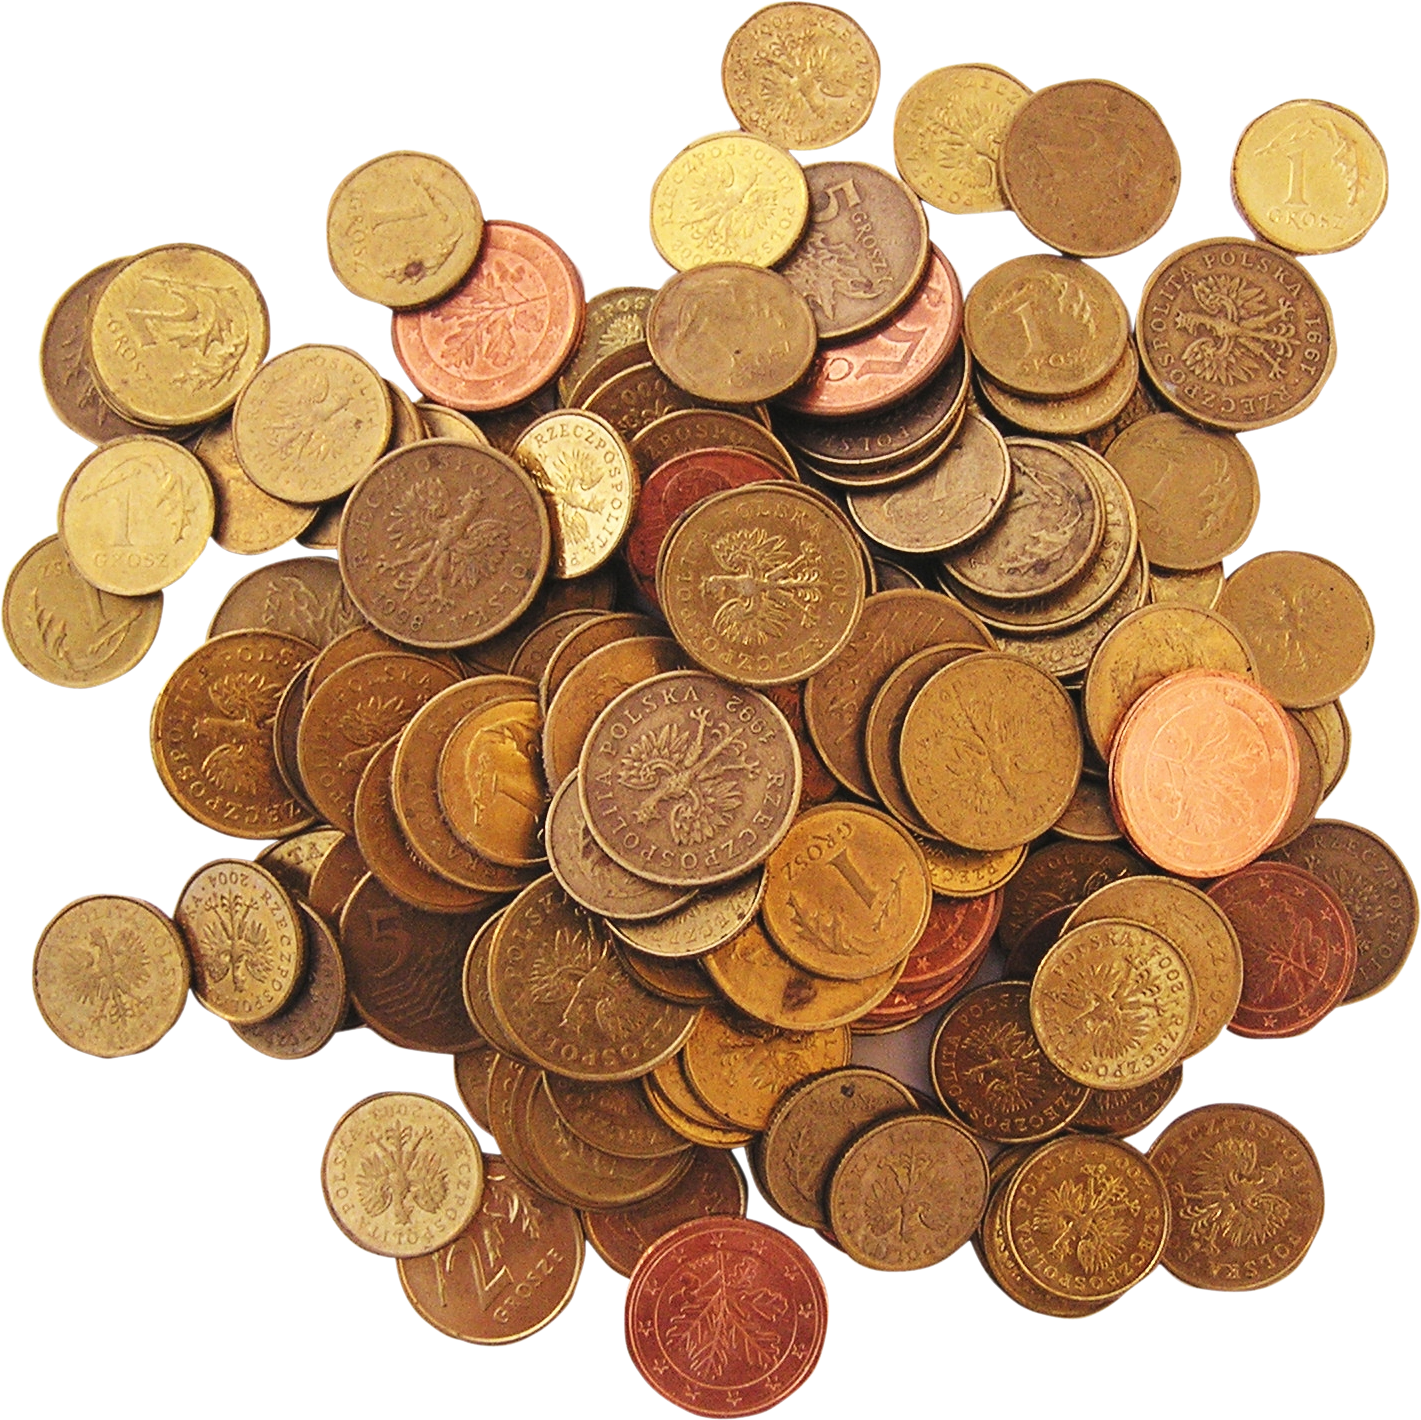 Economy clipart money donation. Pile of coins isolated